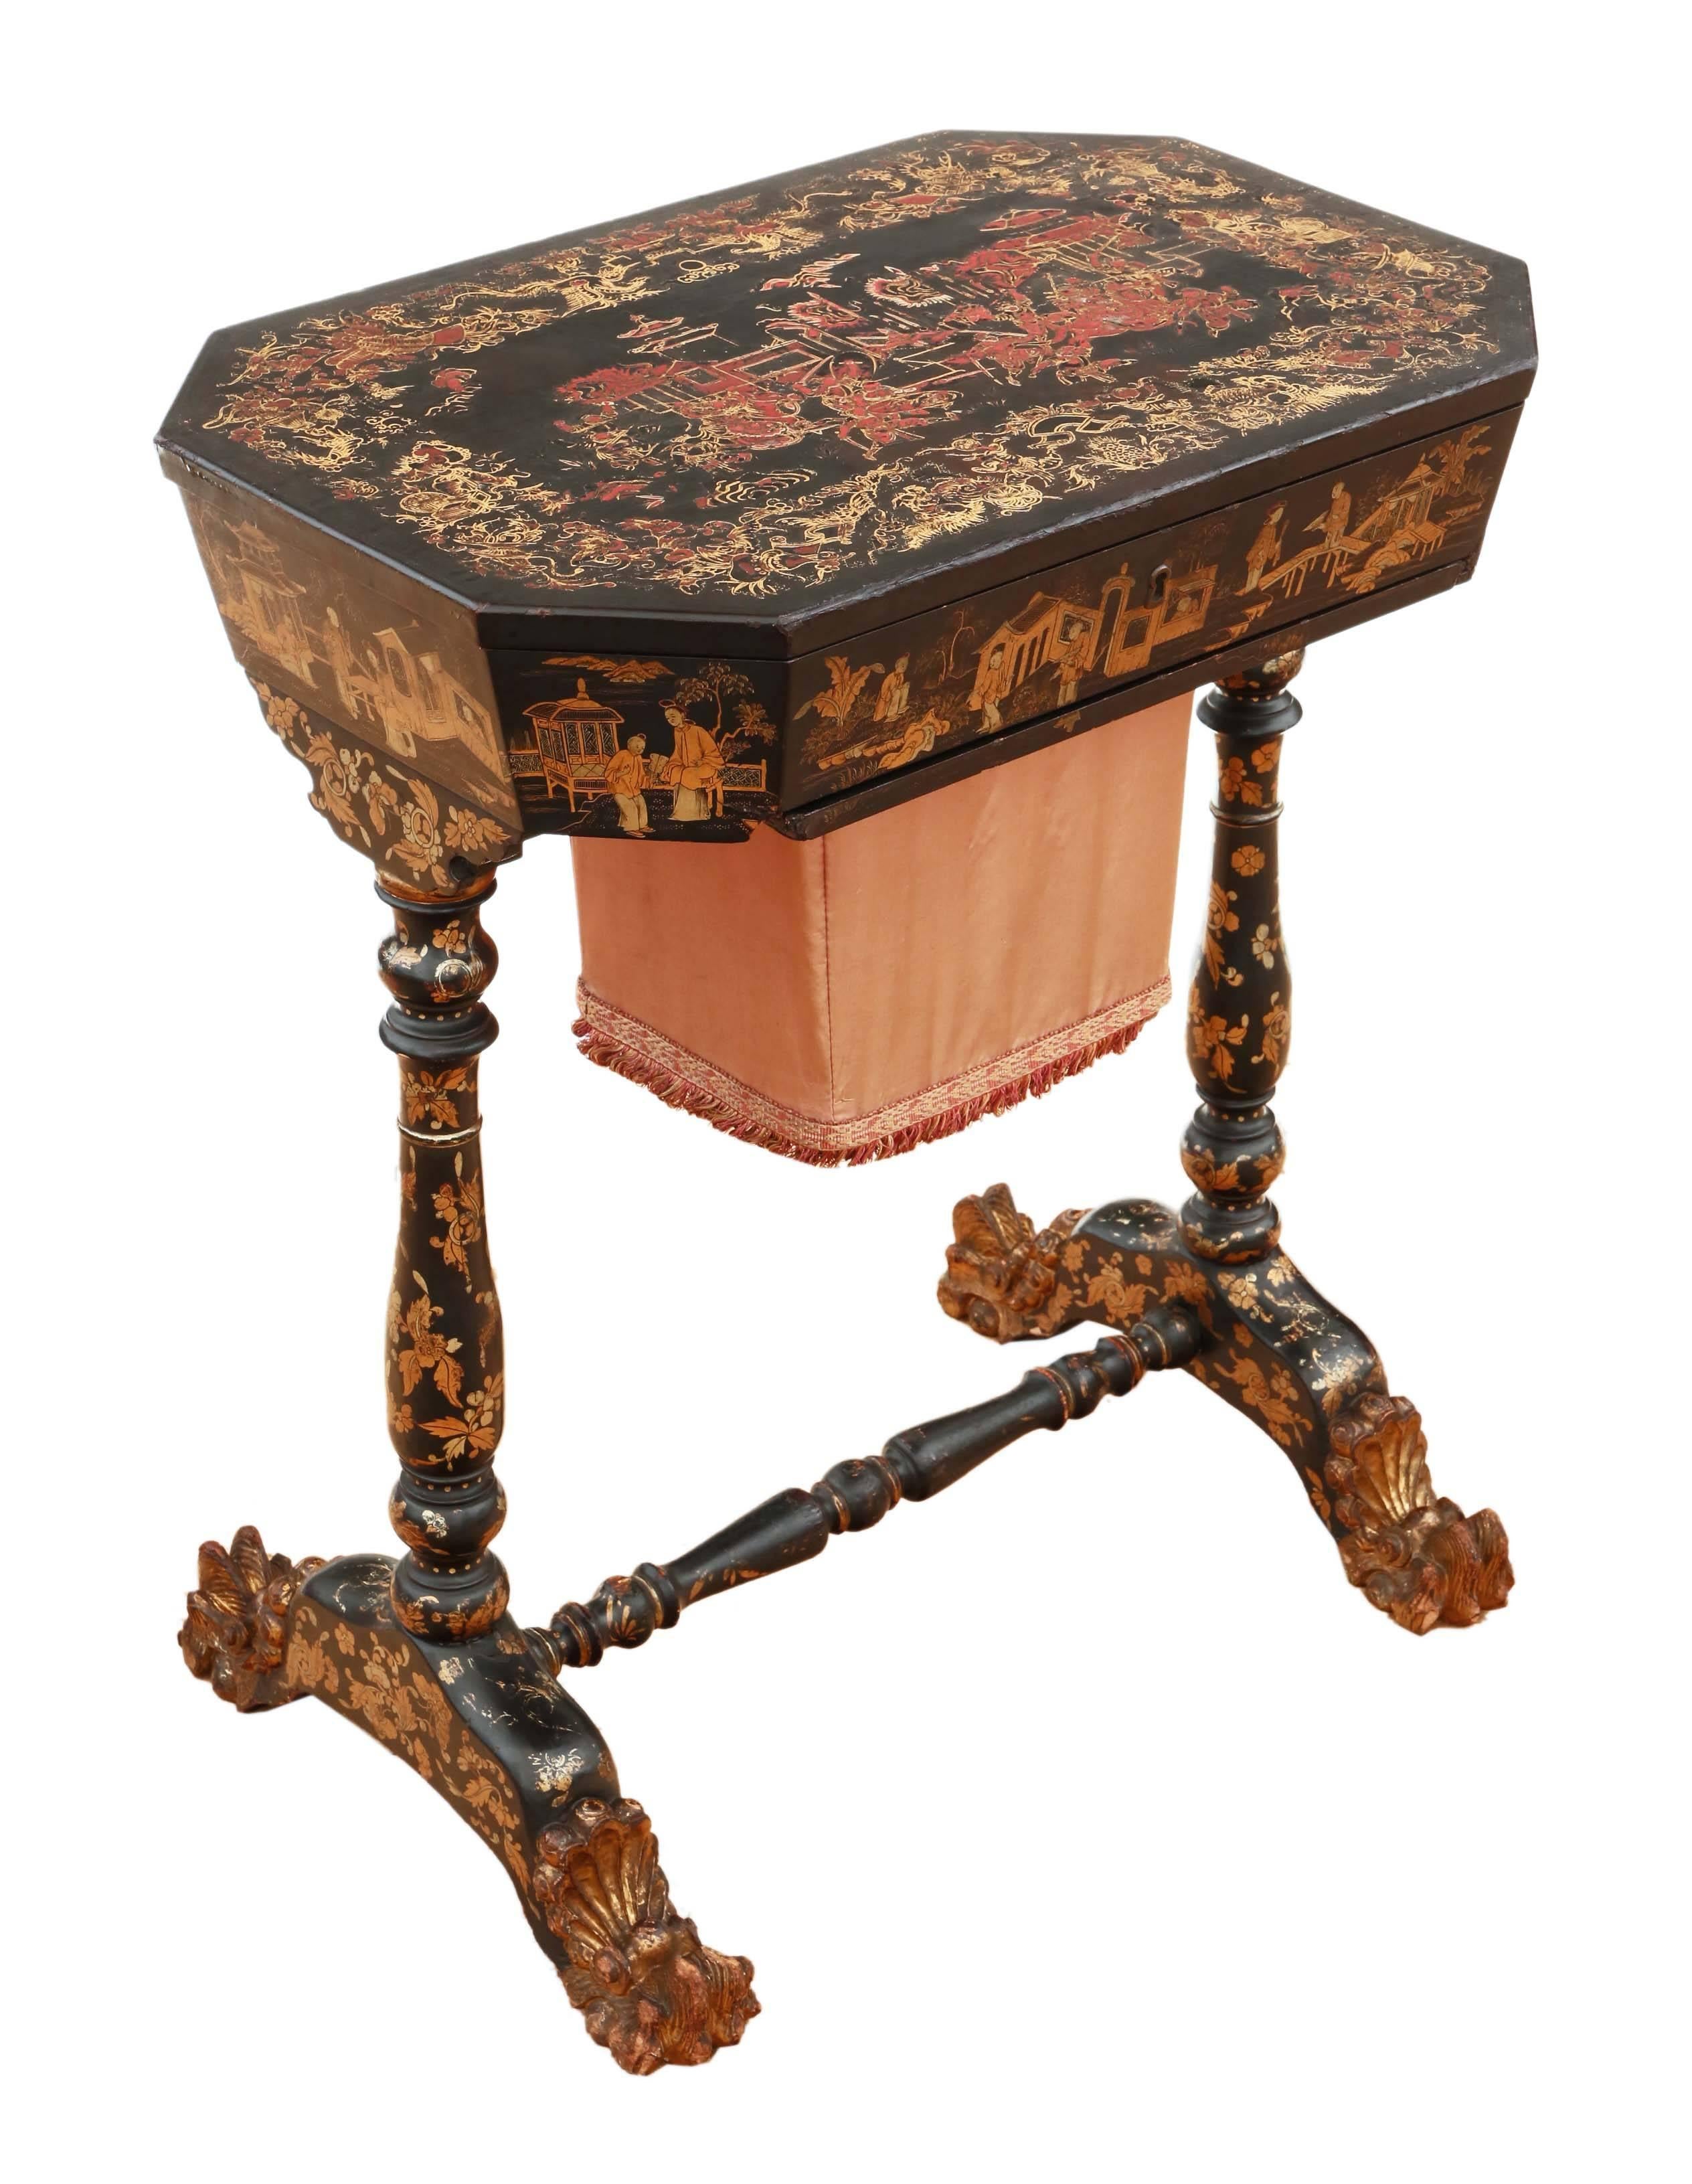 British Antique 19th Century Decorated Chinoiserie Work Side Sewing Table Box For Sale